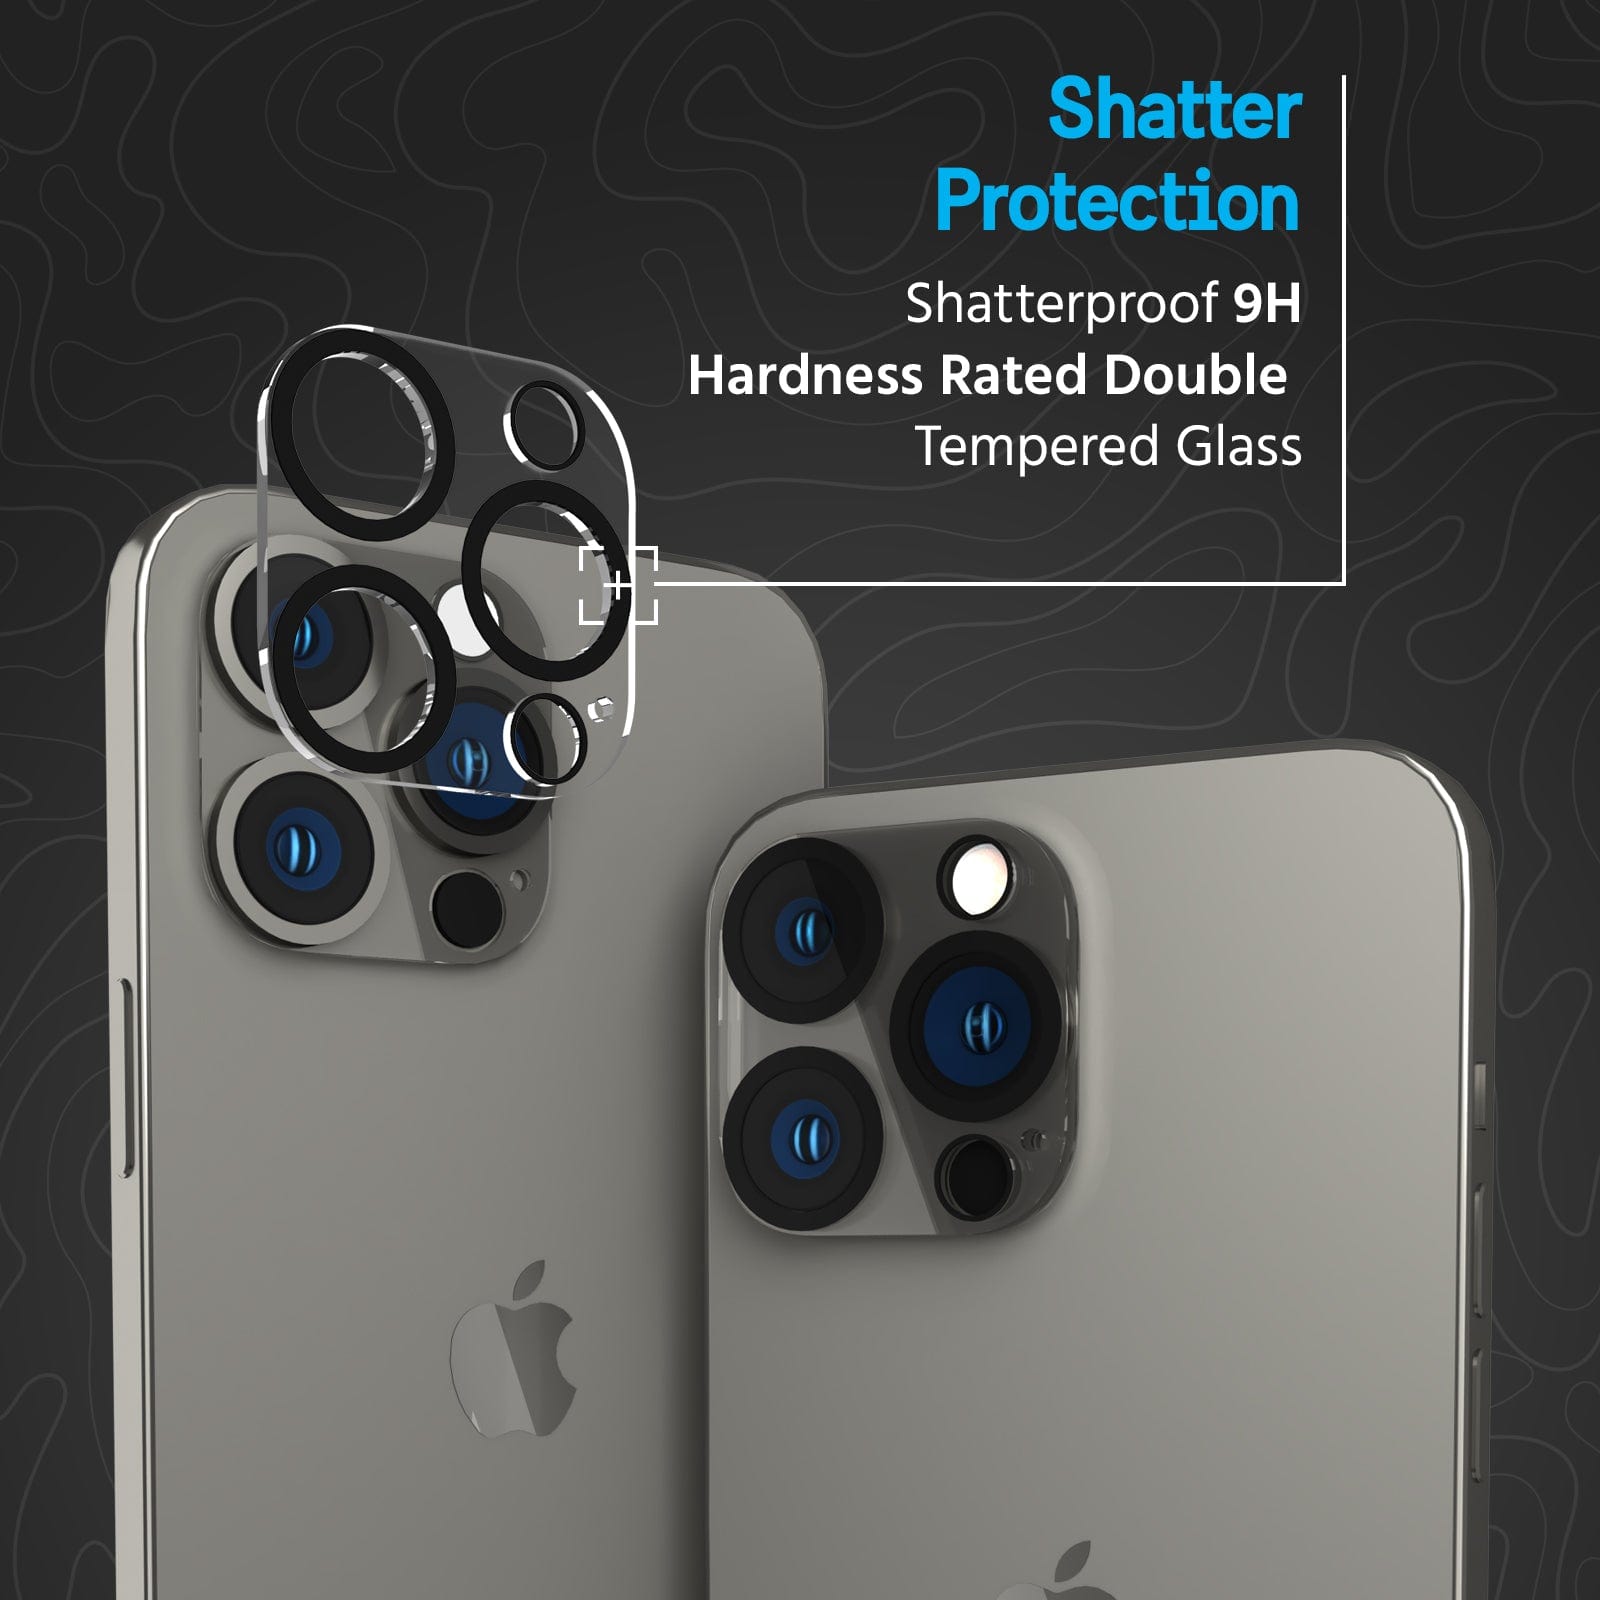 Shatter protection. Shatterproof 9H Hardness Rated Double Tempered Glass.